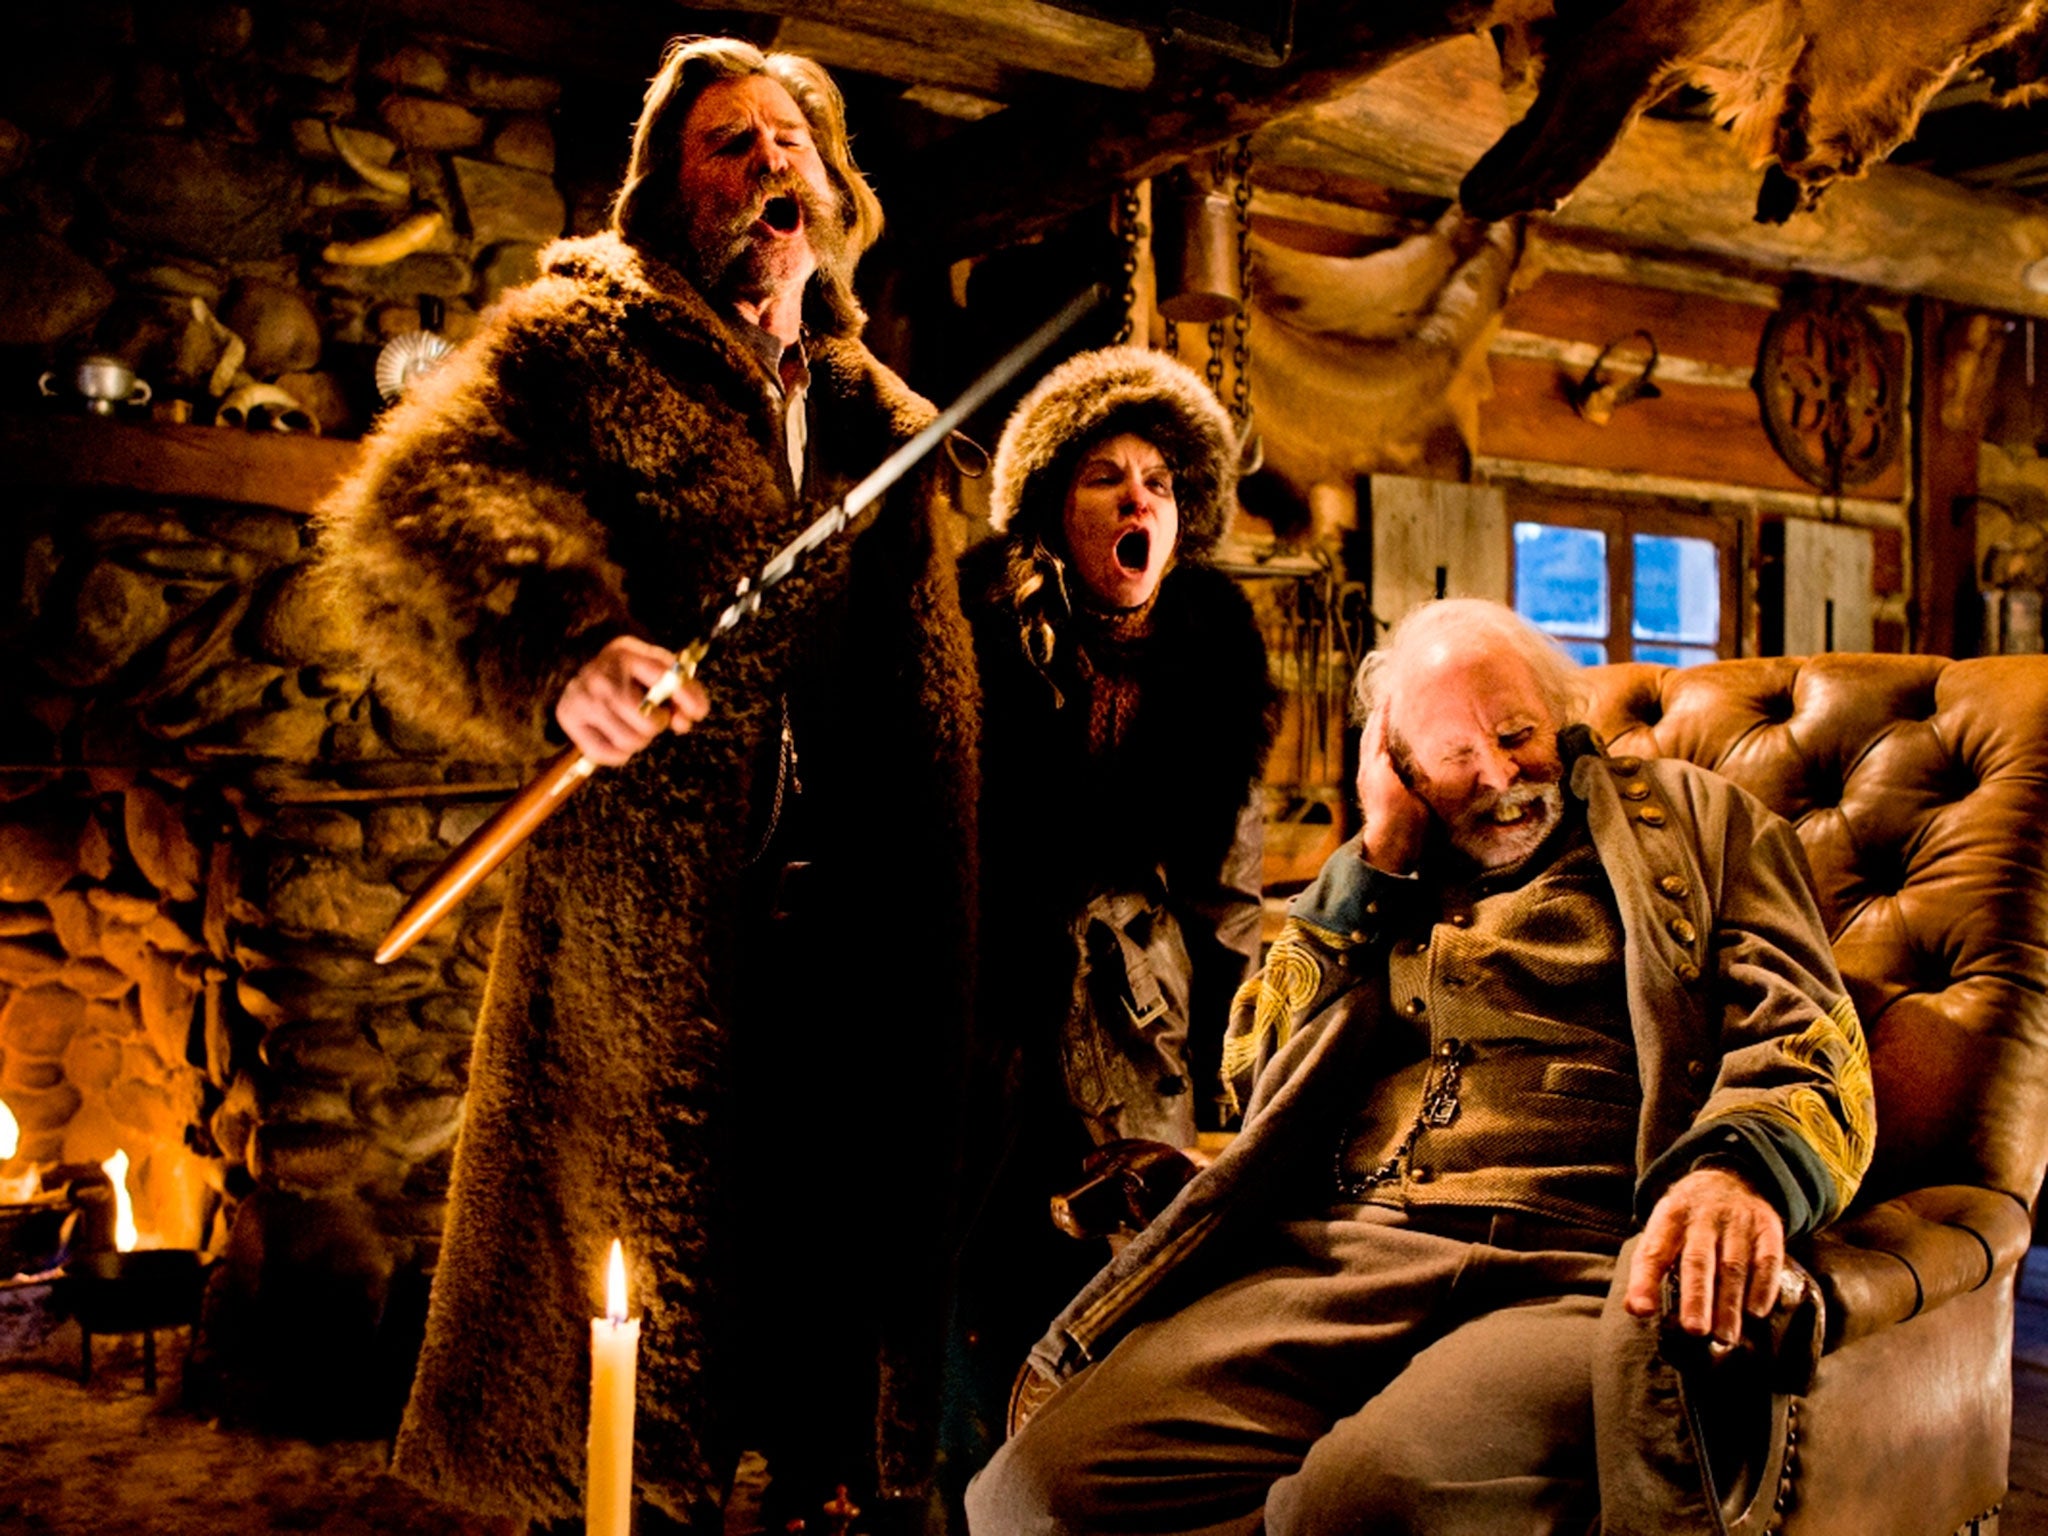 Scene from The Hateful Eight